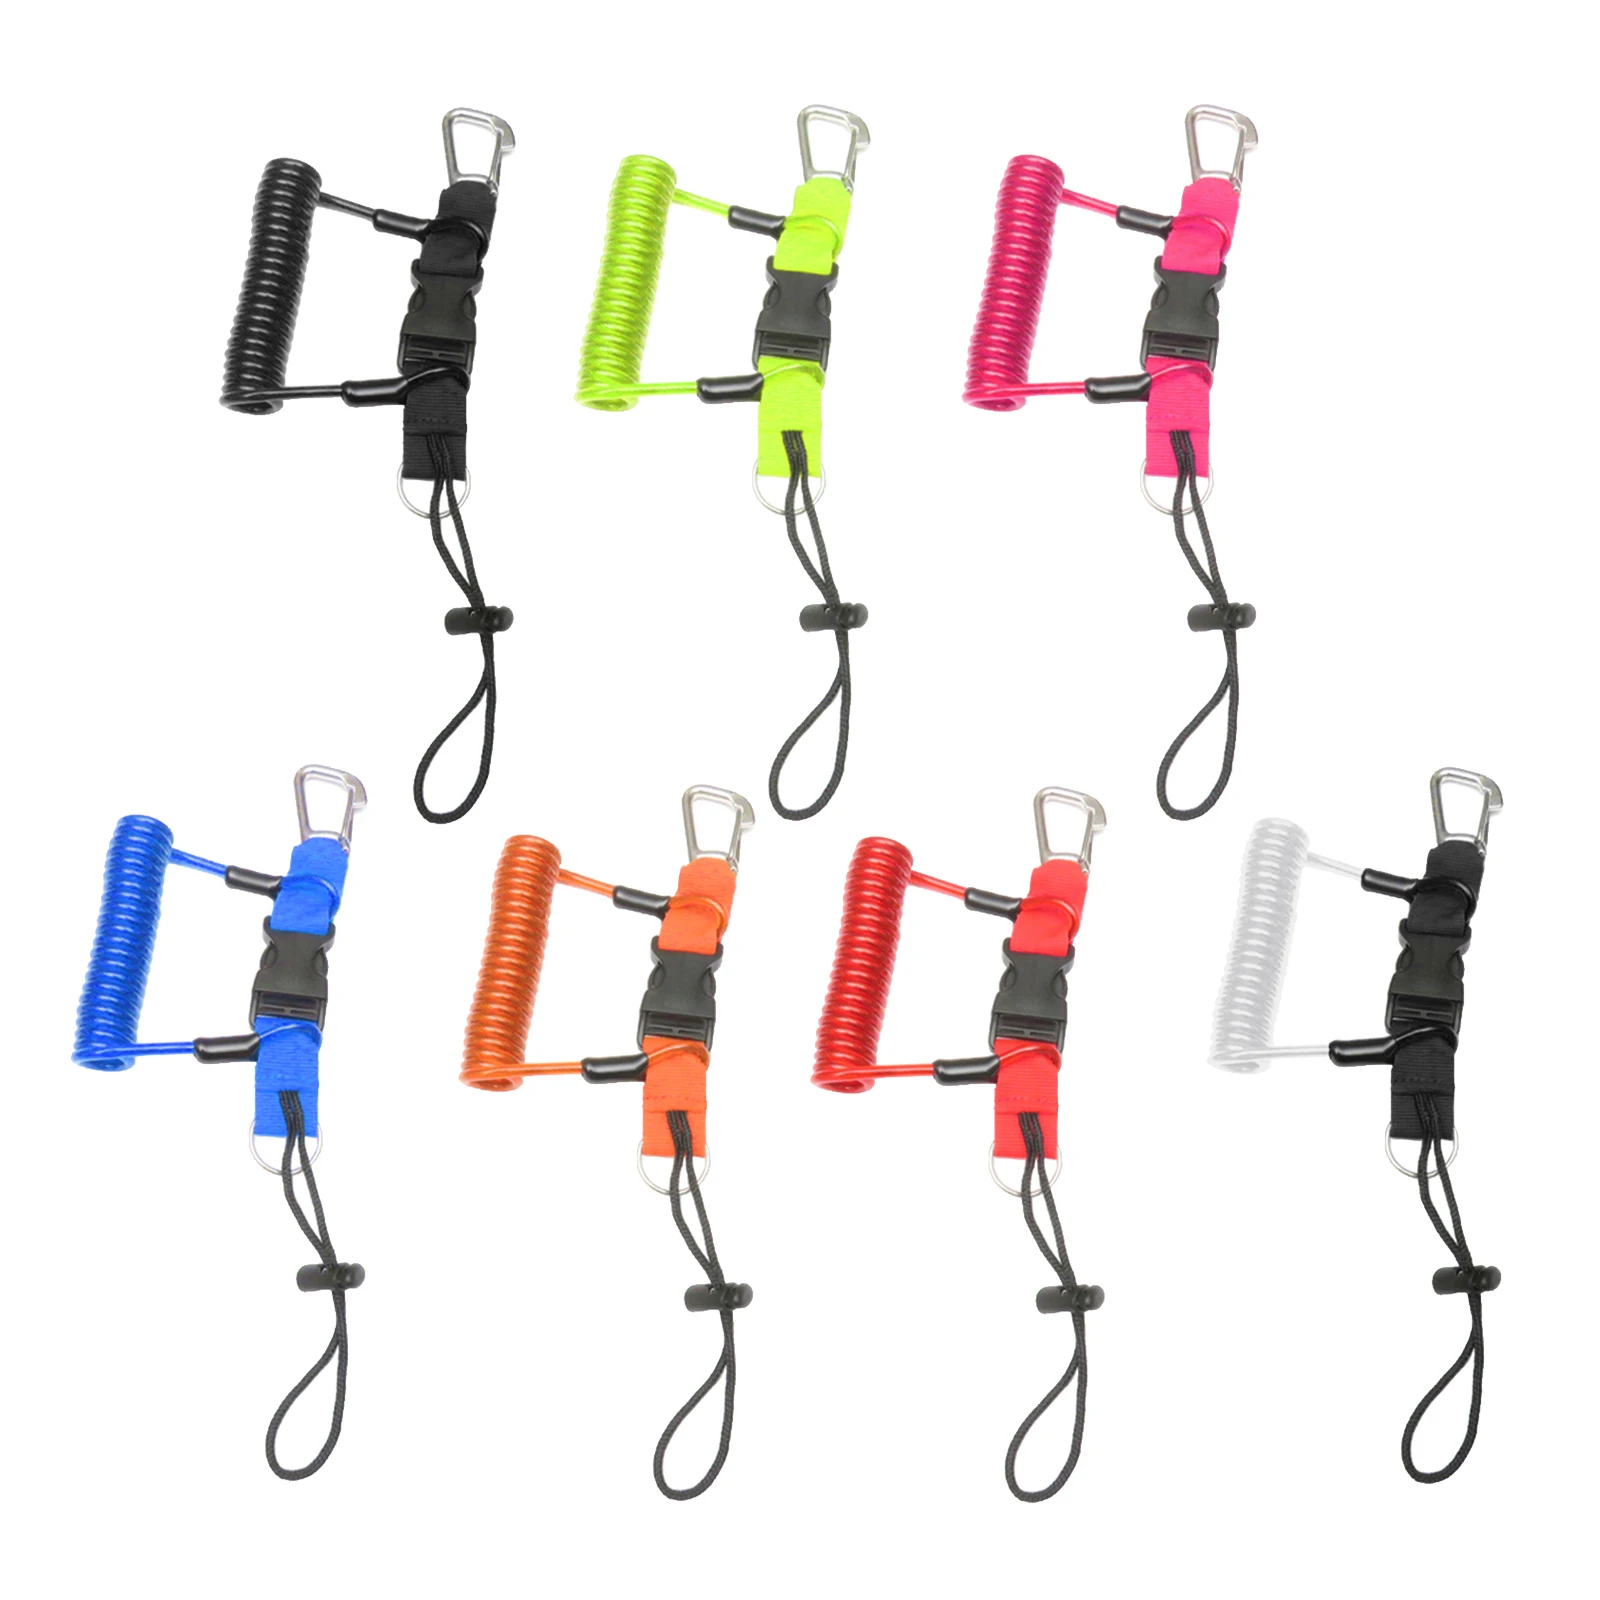 Scuba Diving Lanyard Stainless Steel Spring Coiled Lanyard for Under Kayaking Accessories Parts